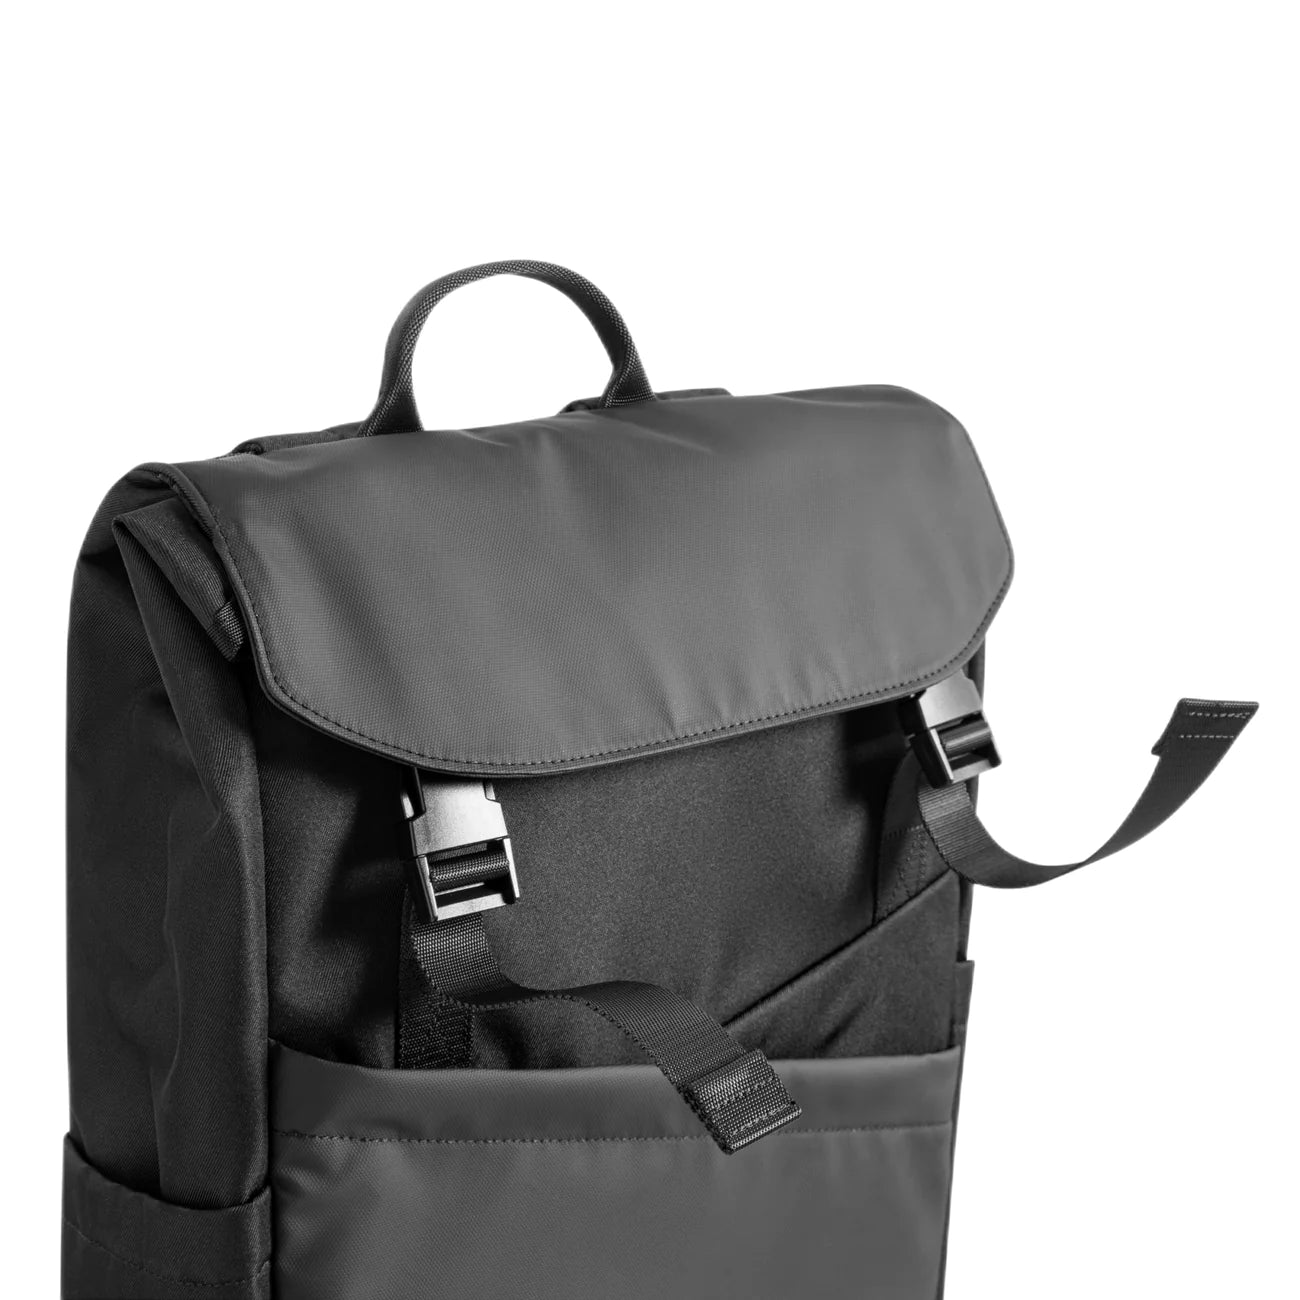 tomtoc Roll Top Laptop Backpack, Lightweight, Water